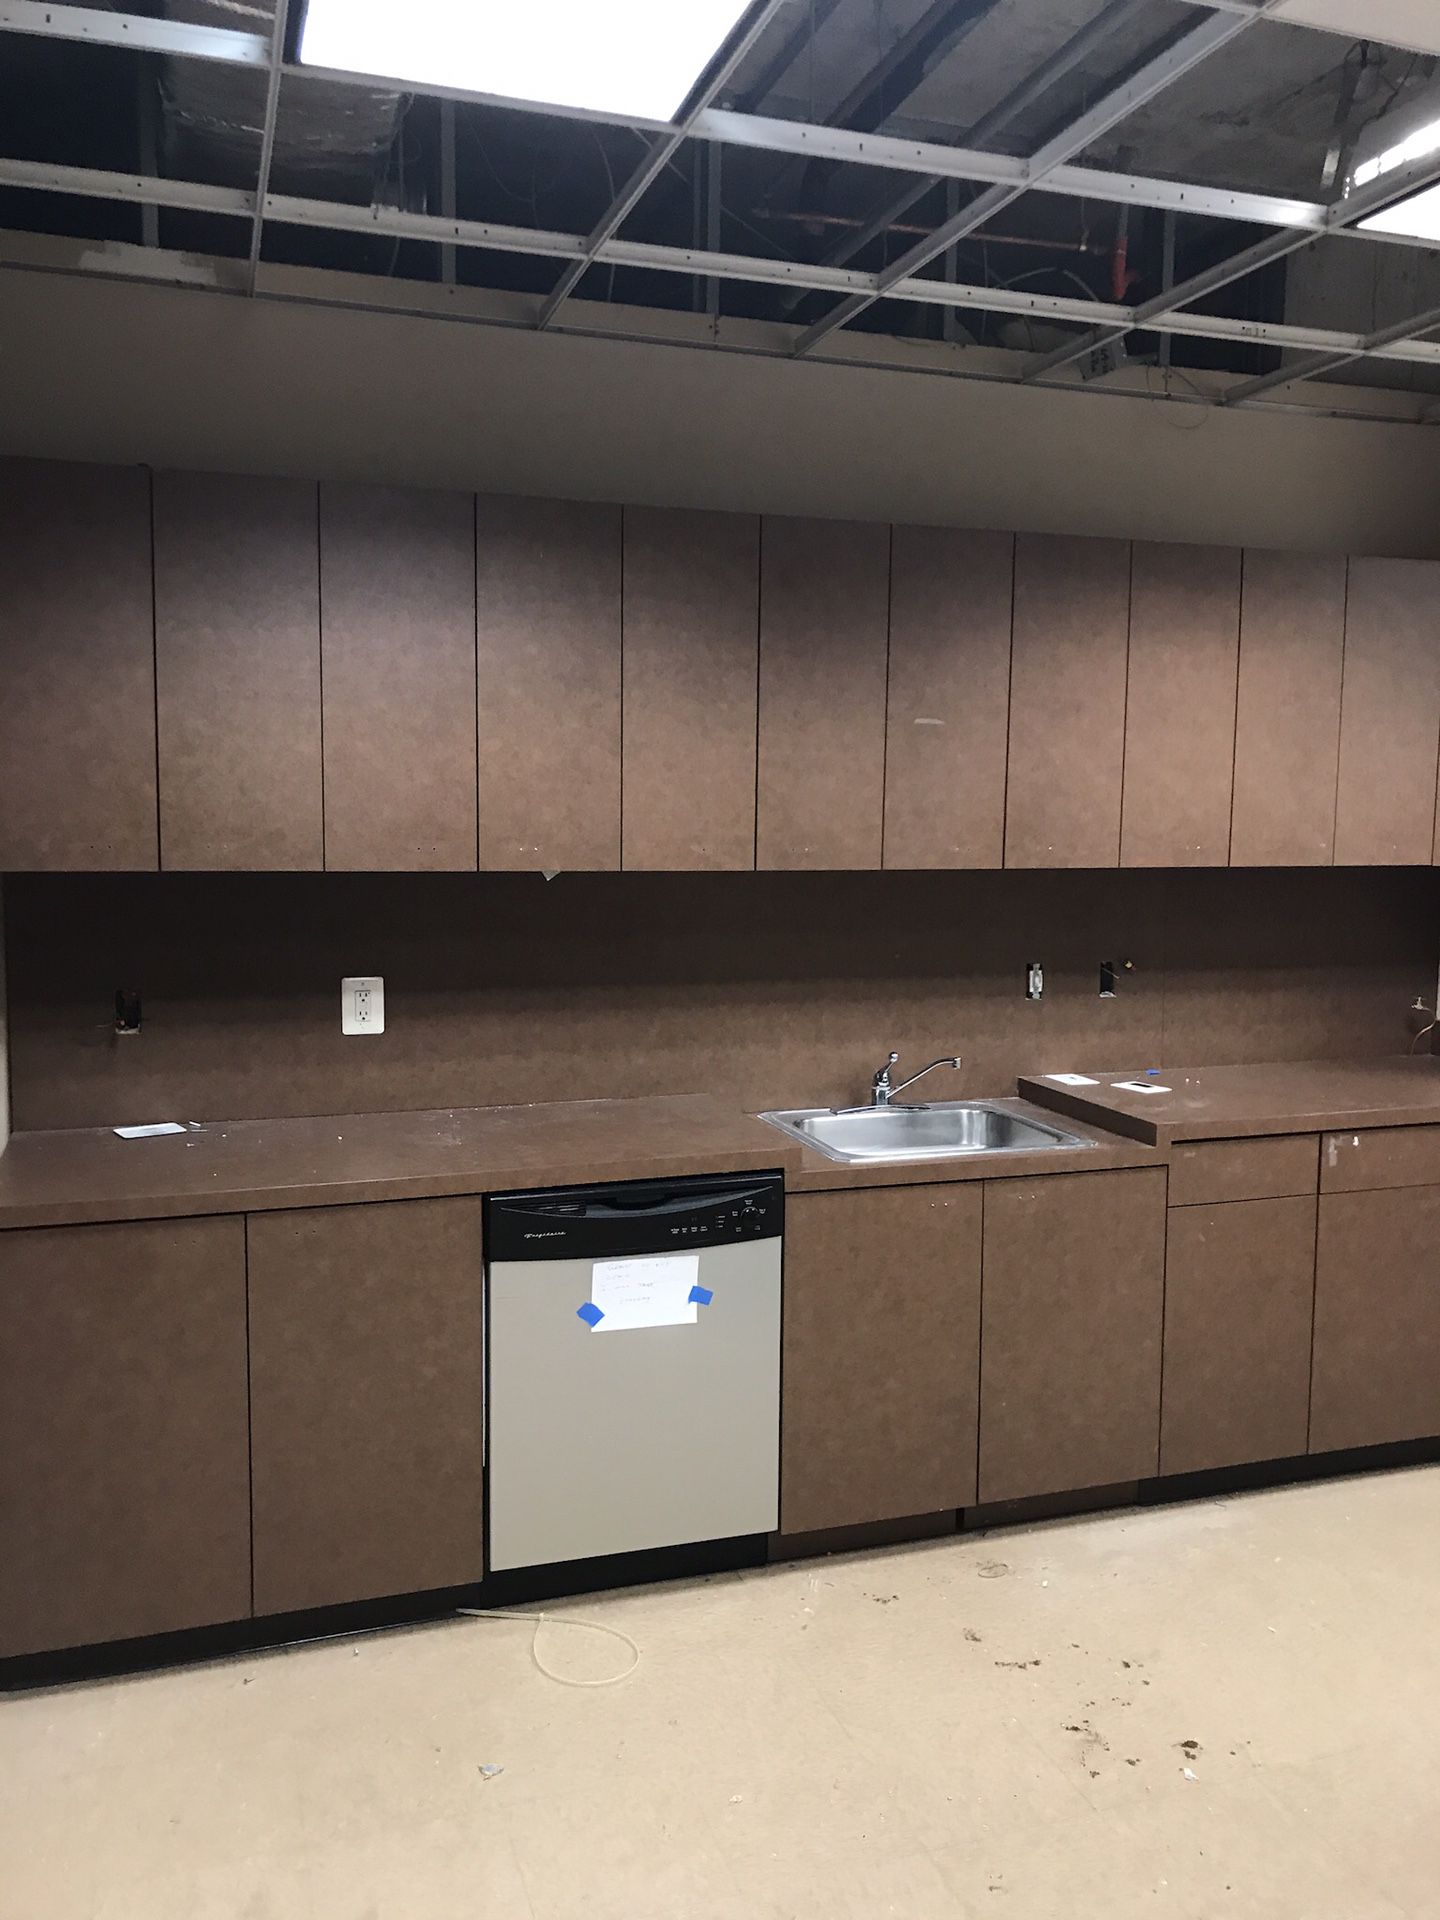 Kitchen cabinets with refrigerator